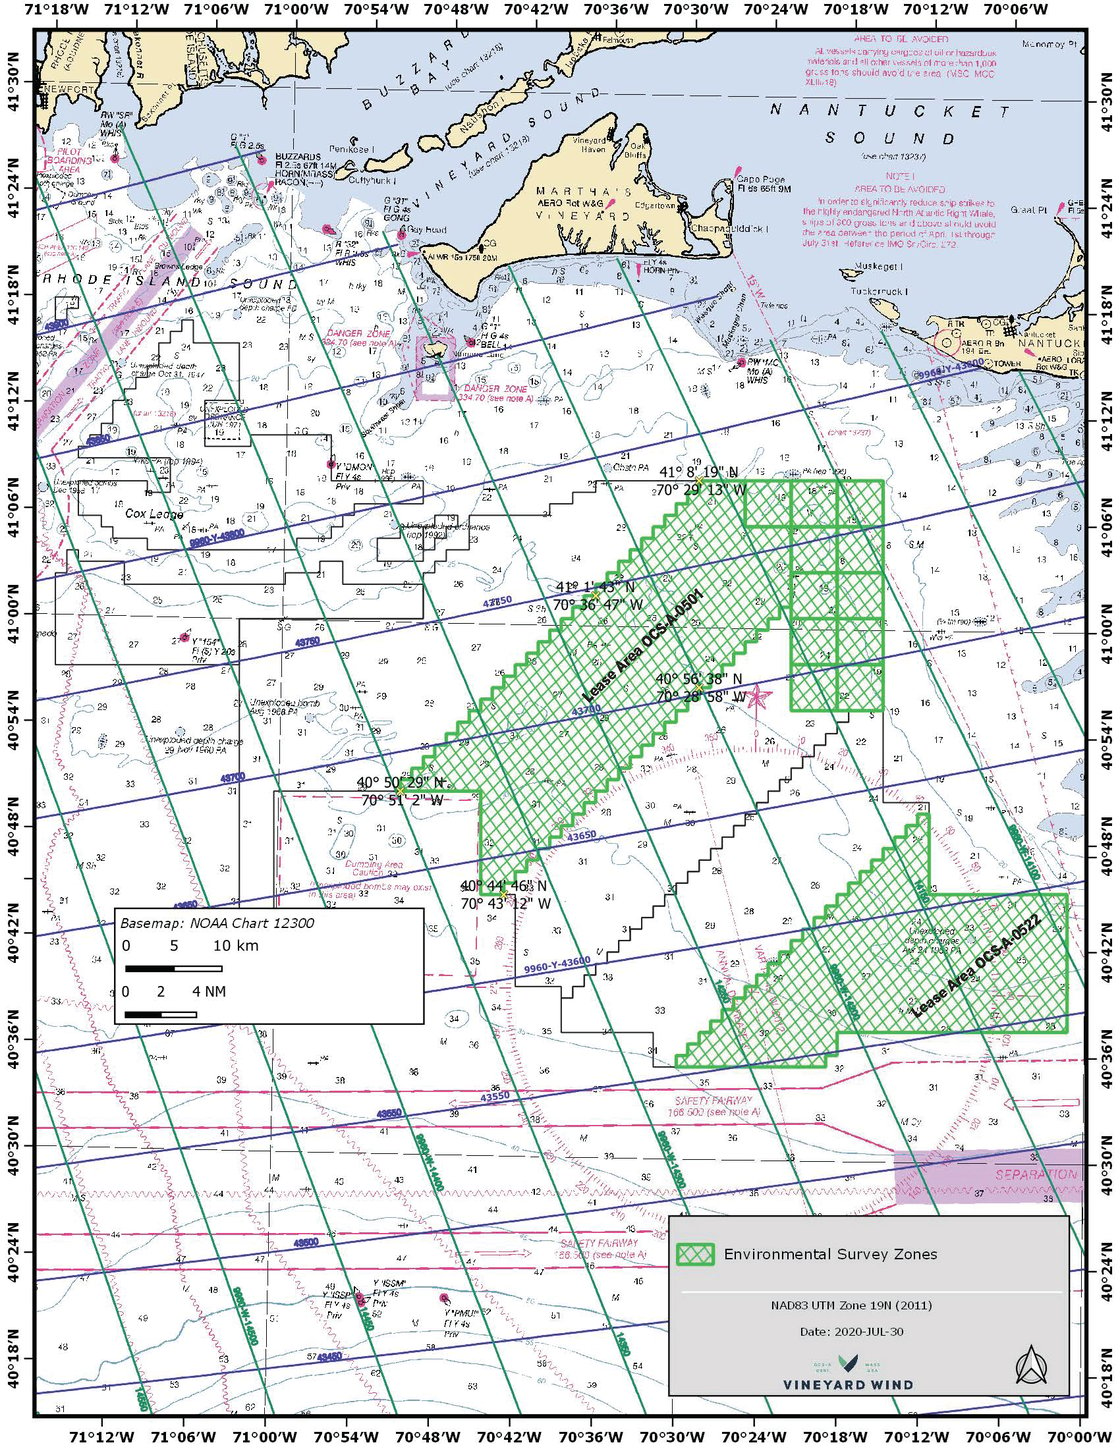 Offshore Wind Mariner Update No. 30 7.30.2020 (2 revised)_Page_2